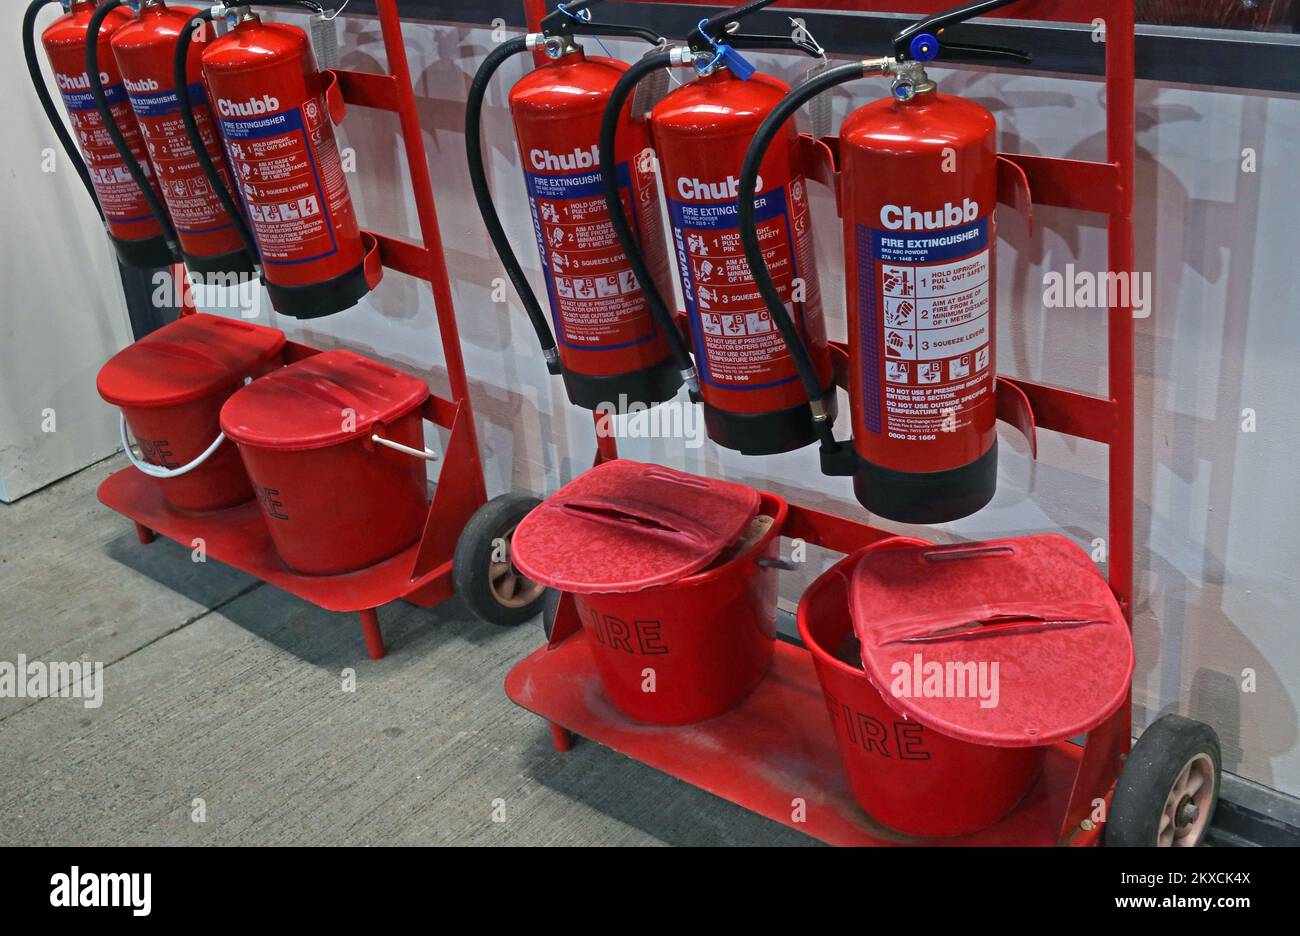 Chubb fire extinguishers and red fire buckets Stock Photo